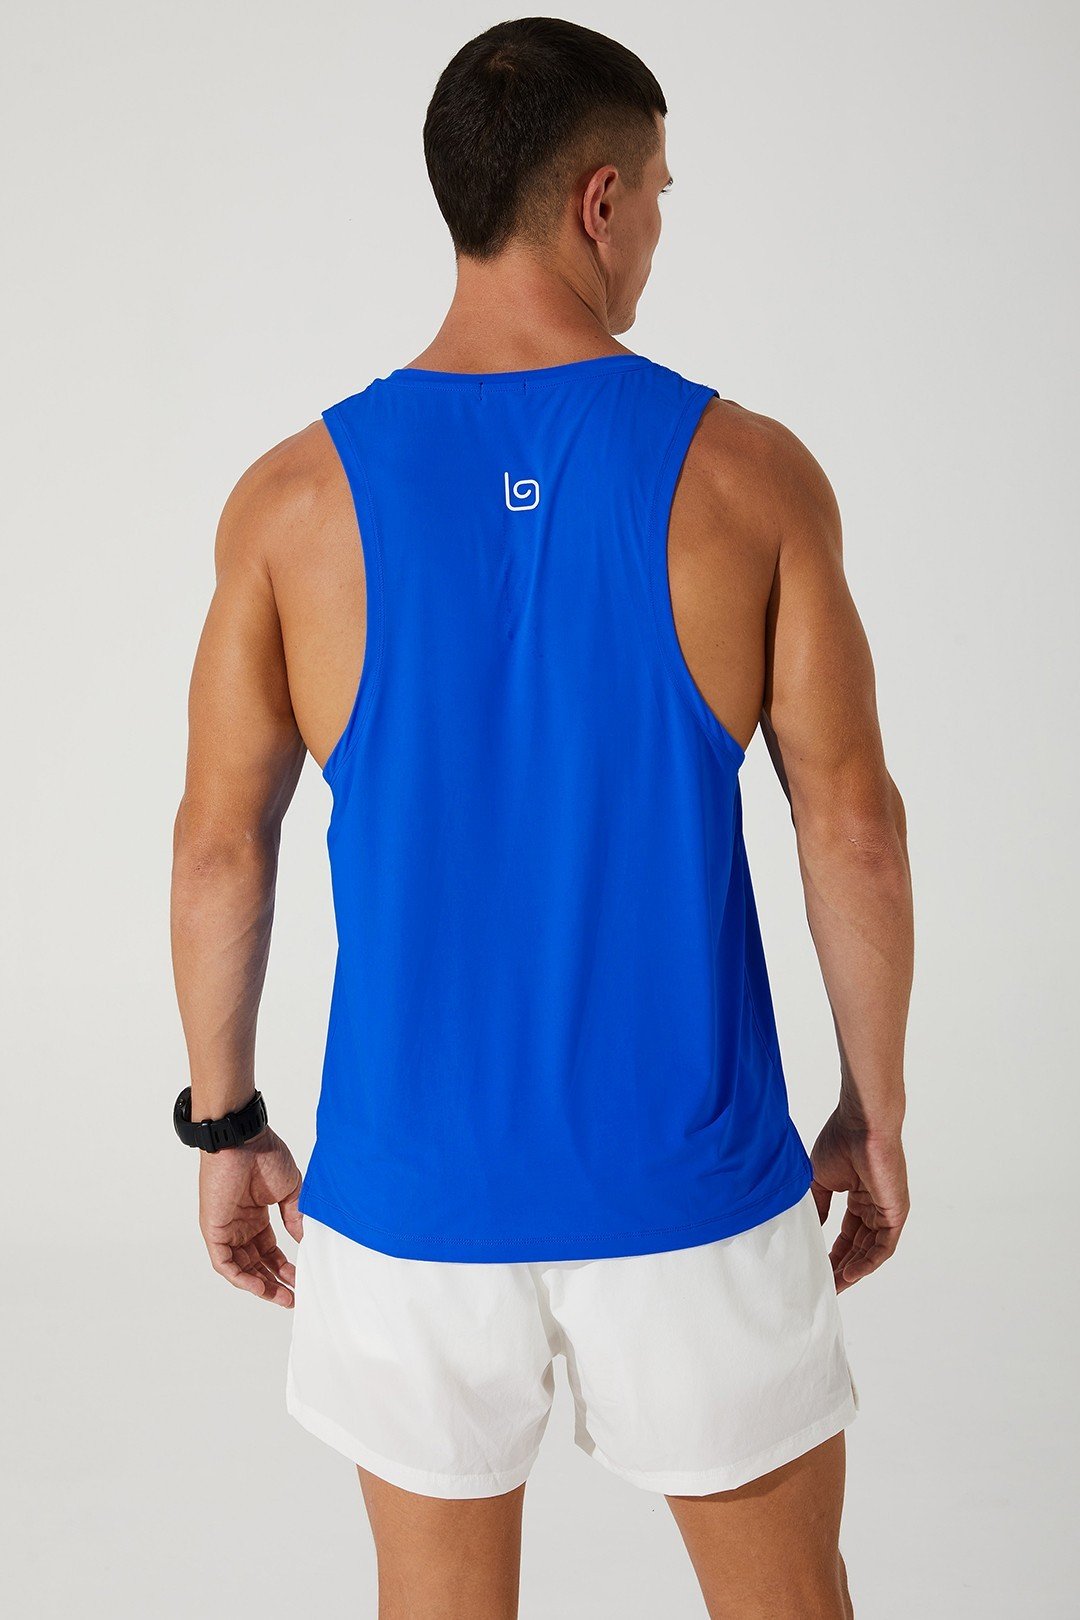 Blue tank top for men by Ricard Tank, style OW-0027-MTT-BL, in a vibrant shade of blue.